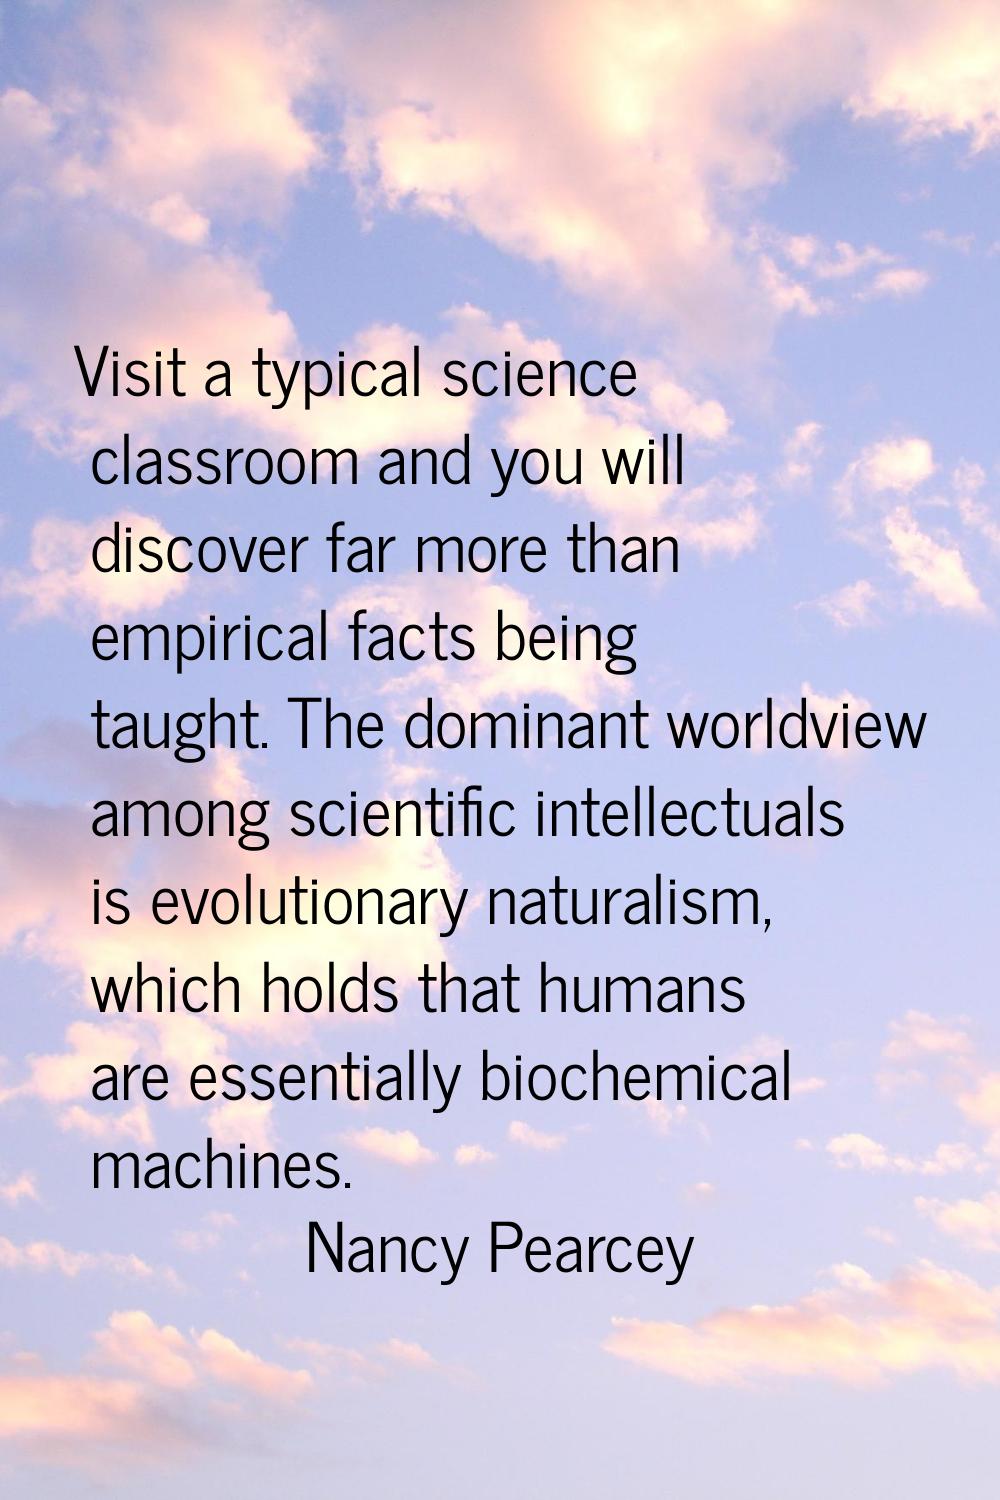 Visit a typical science classroom and you will discover far more than empirical facts being taught.